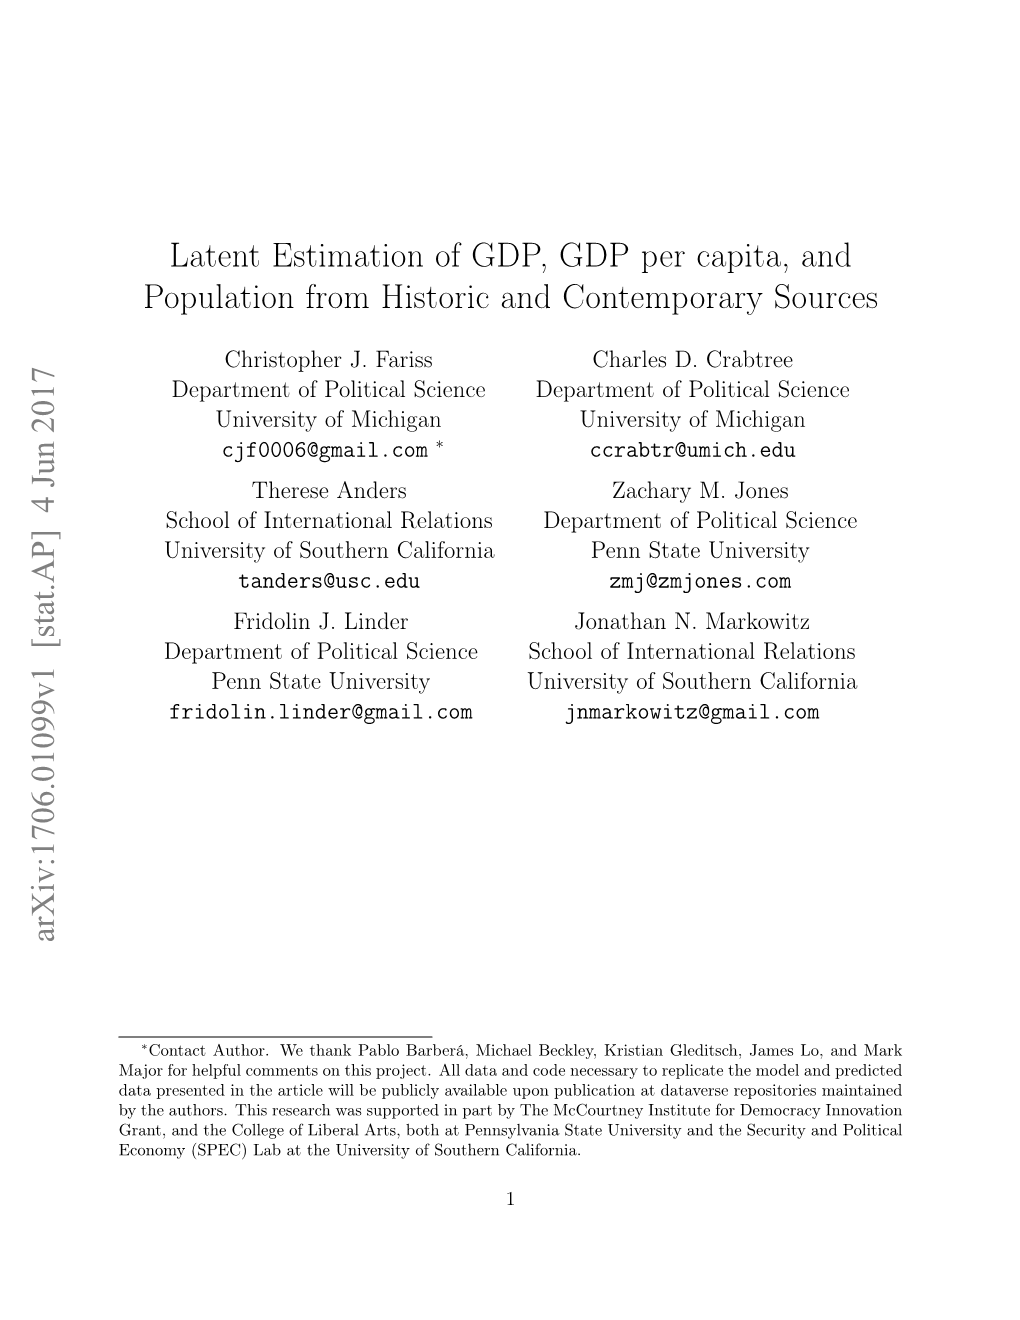 Latent Estimation of GDP, GDP Per Capita, and Population from Historic and Contemporary Sources